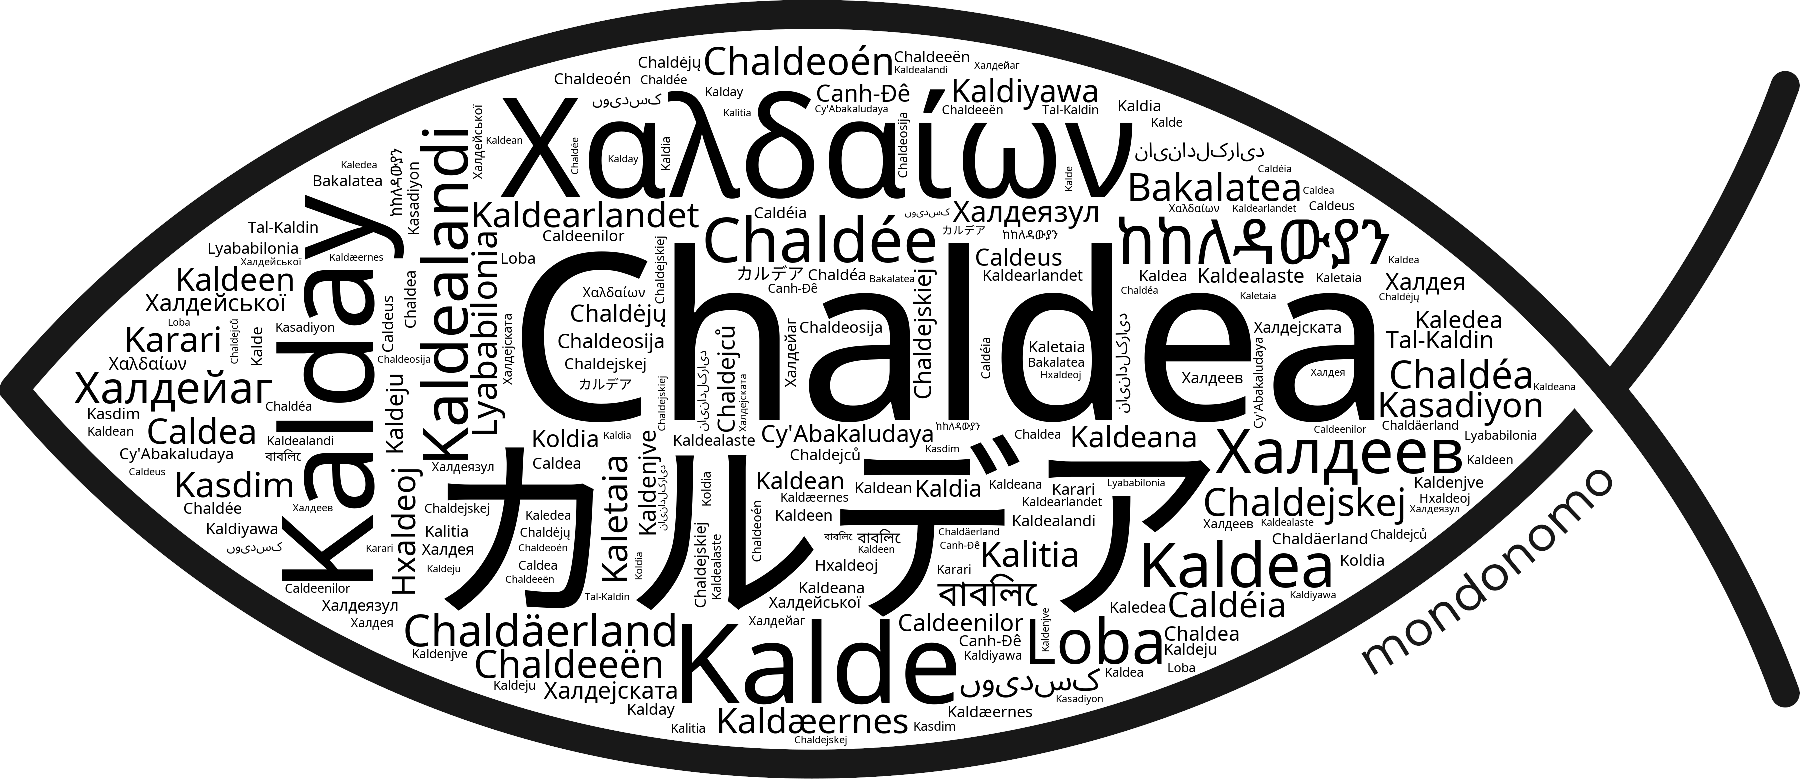 Name Chaldea in the world's Bibles